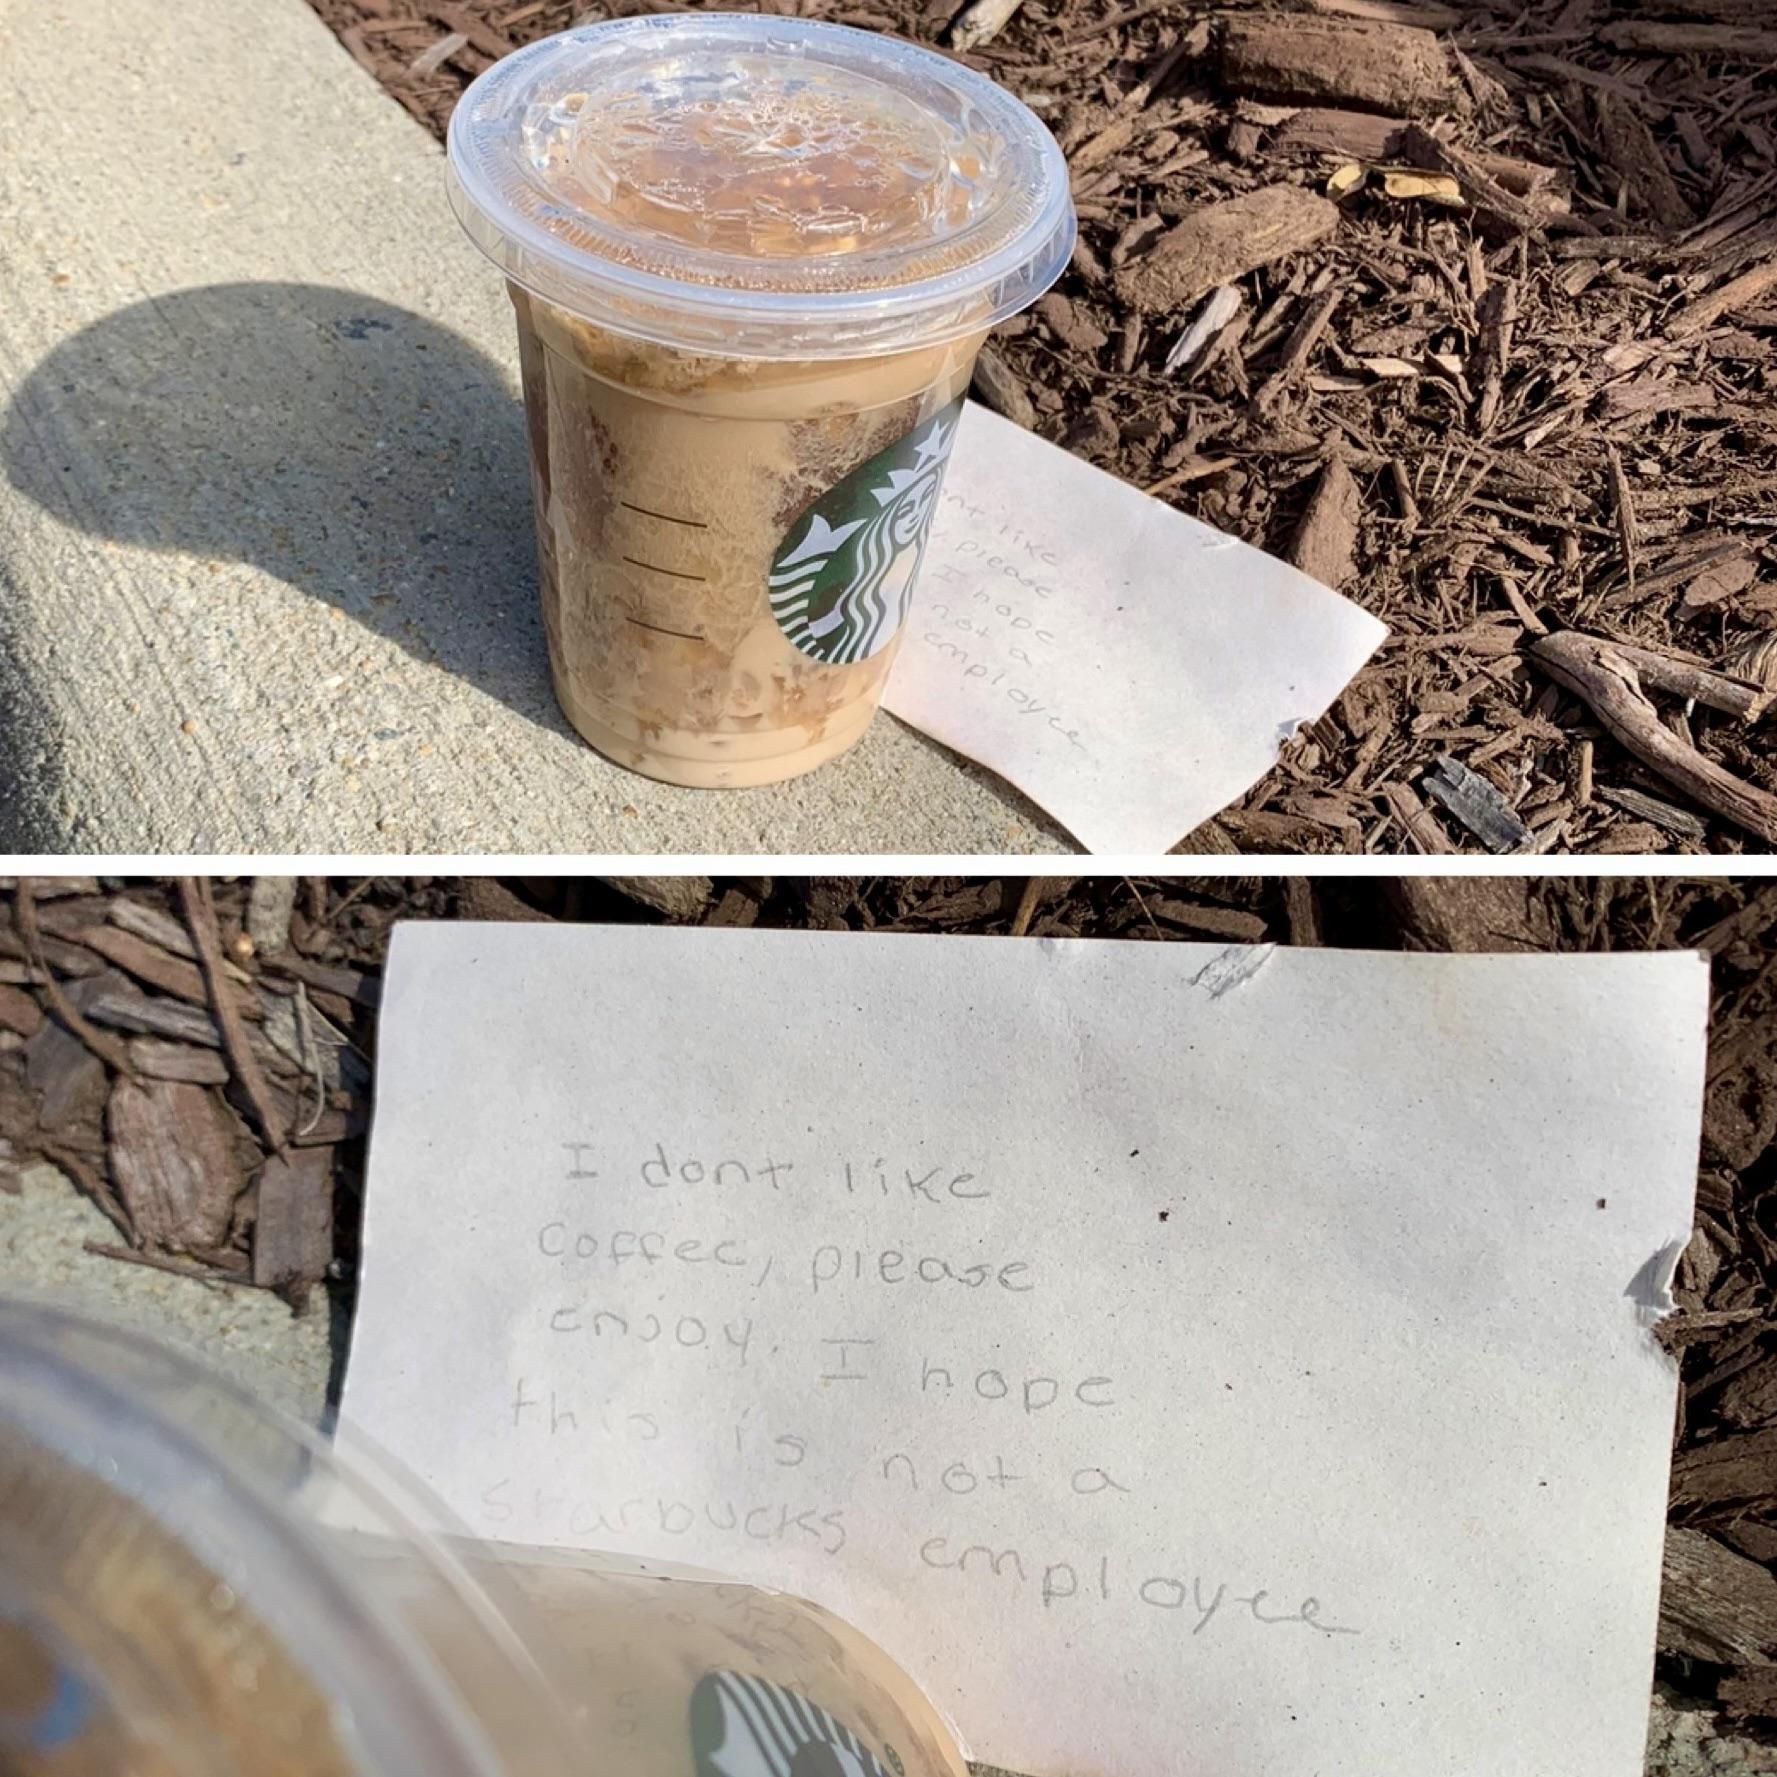 Found this on the curb… “I don’t like coffee, please enjoy”